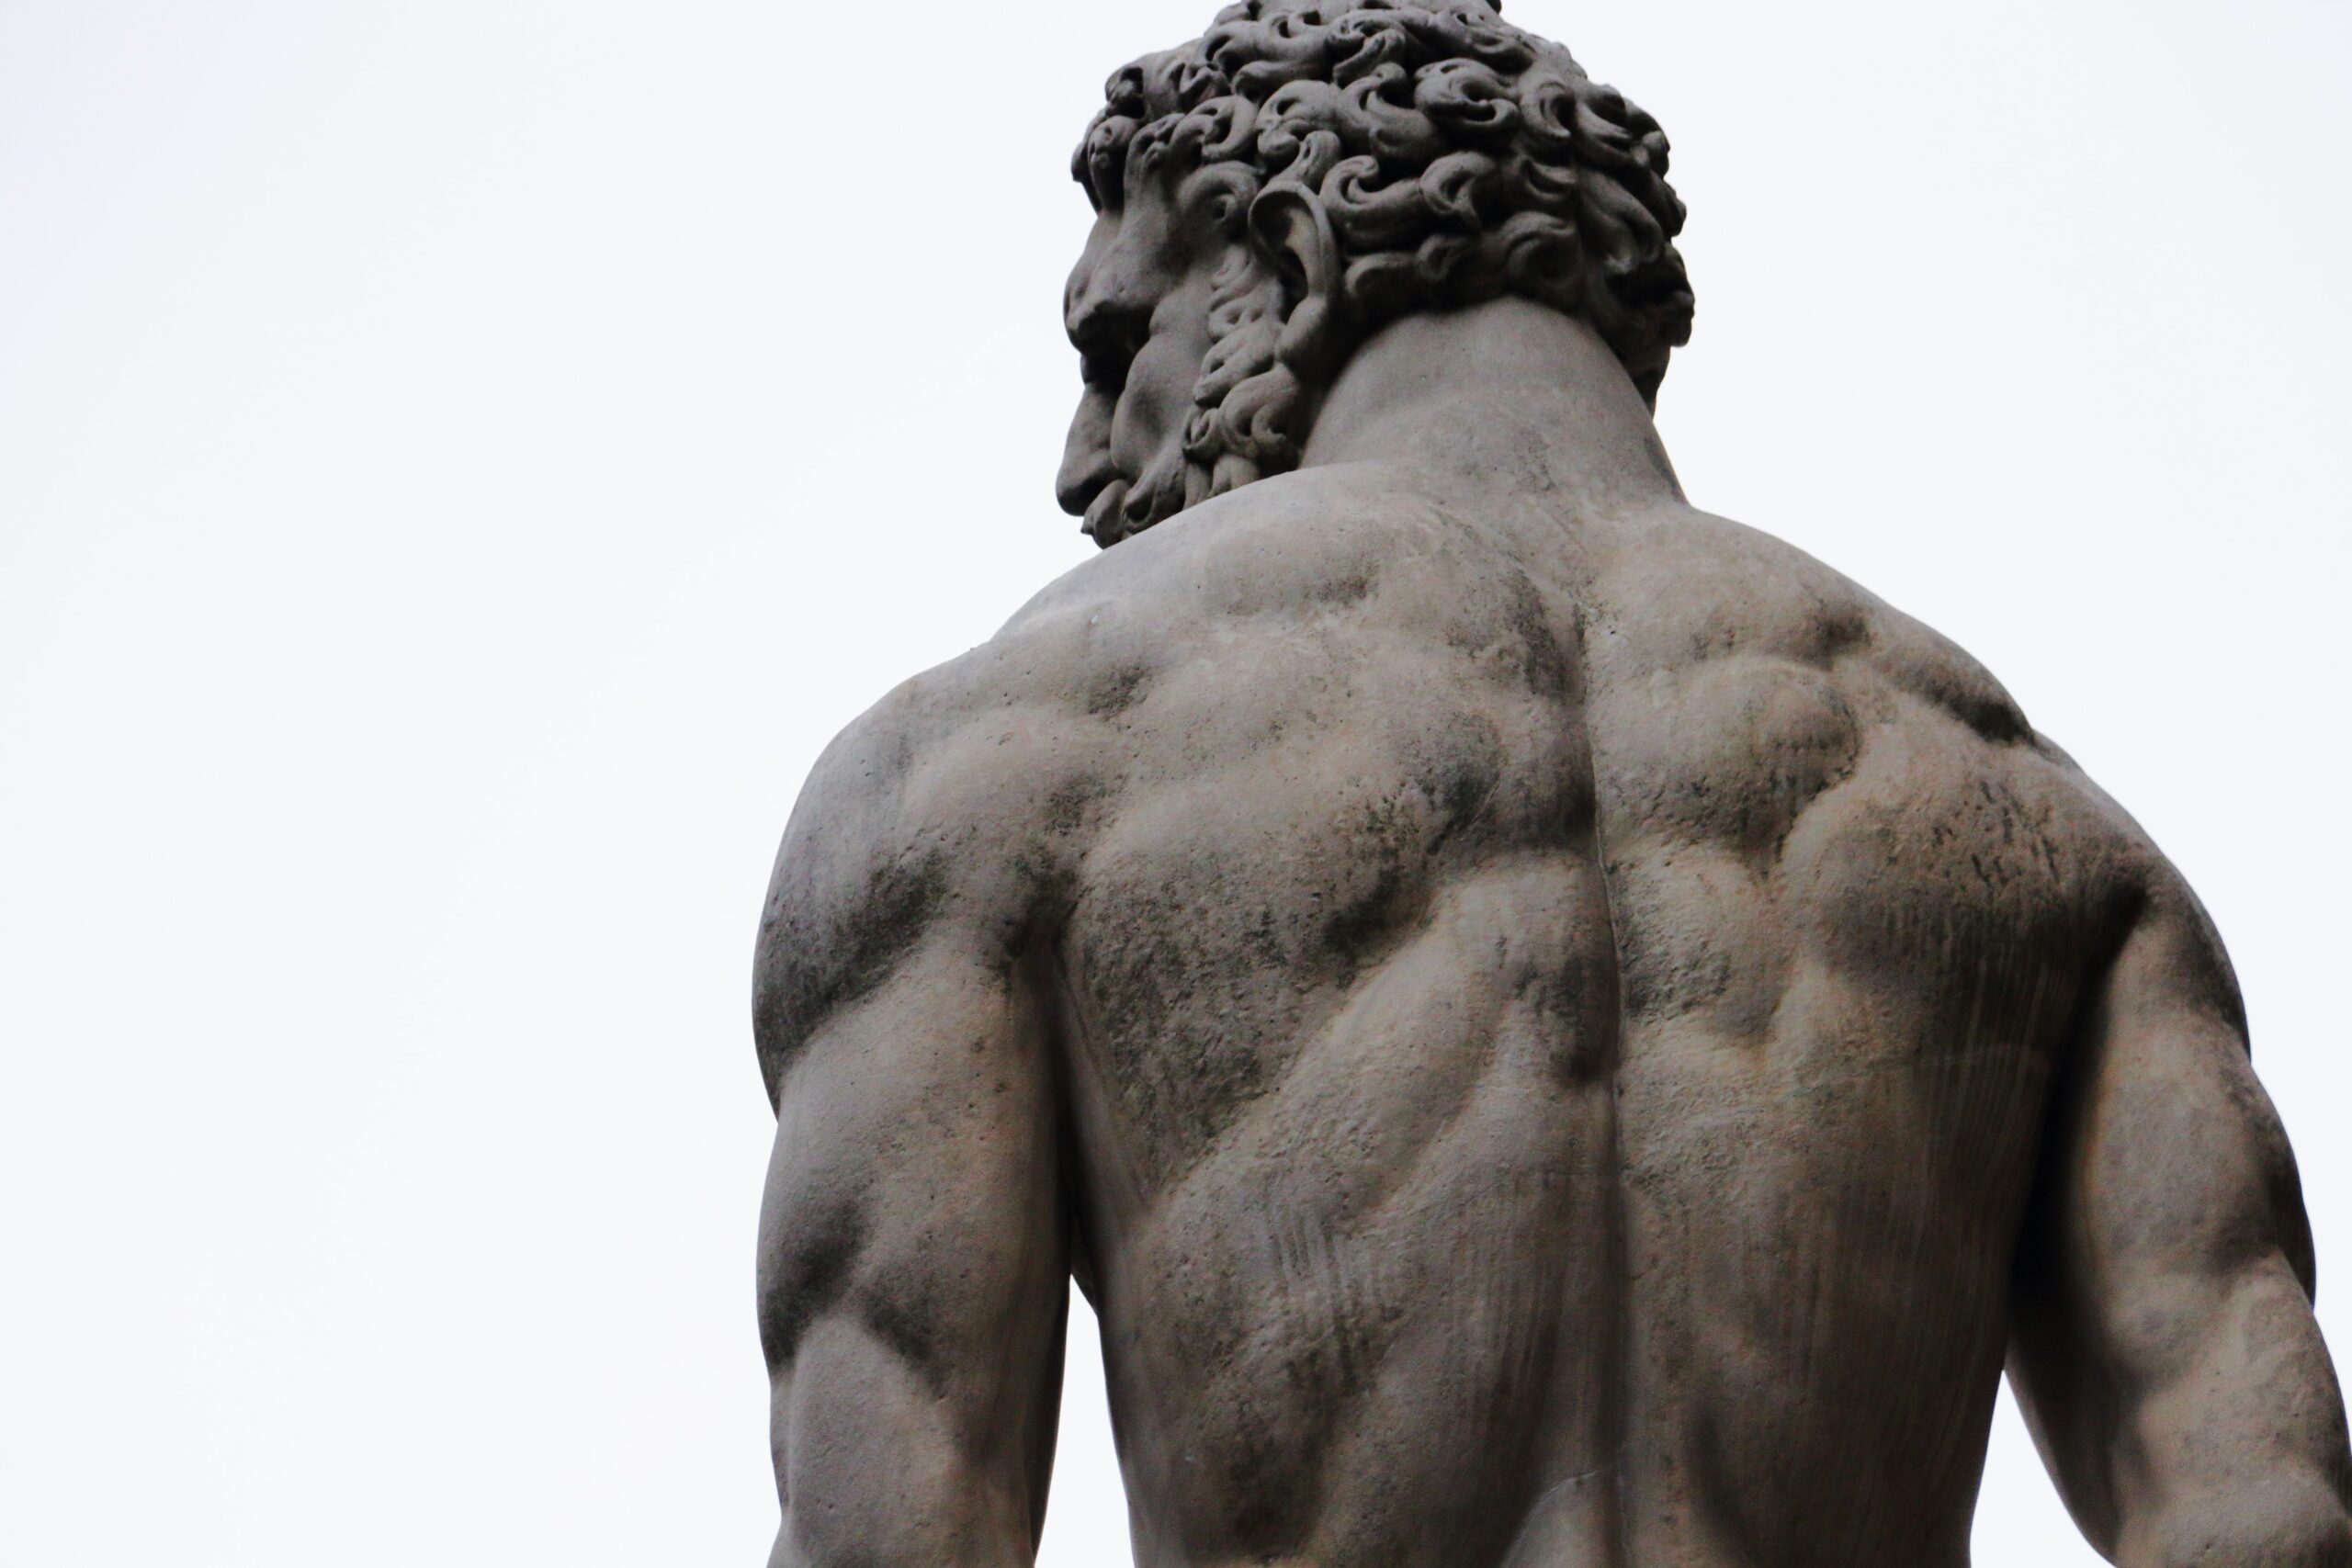 Statute of stoic muscular back physique